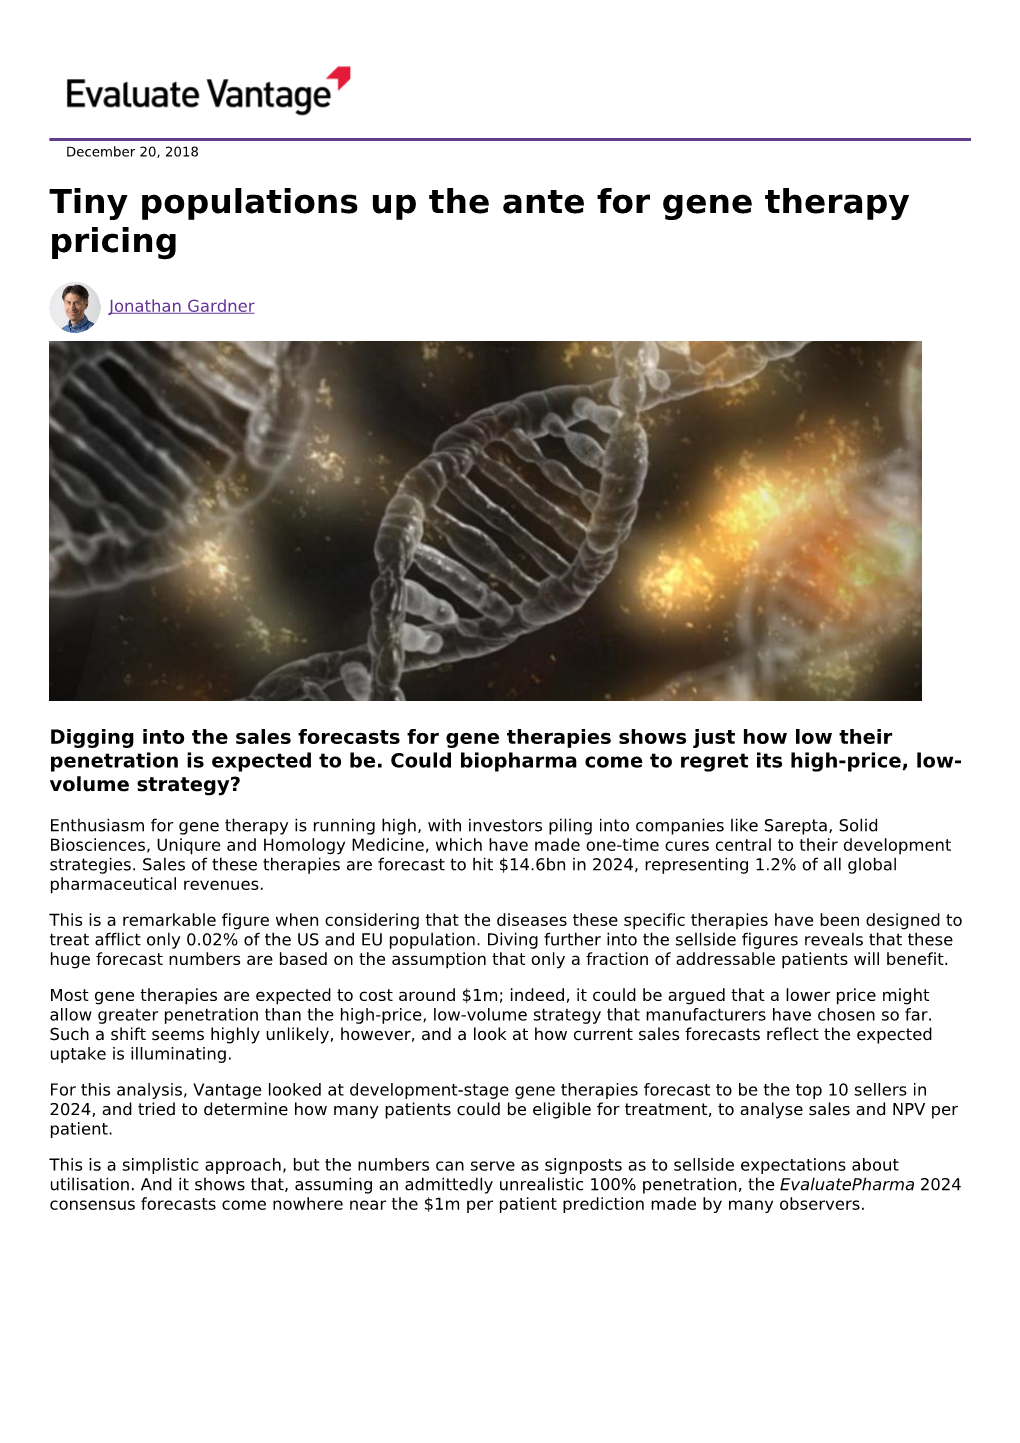 Tiny Populations up the Ante for Gene Therapy Pricing